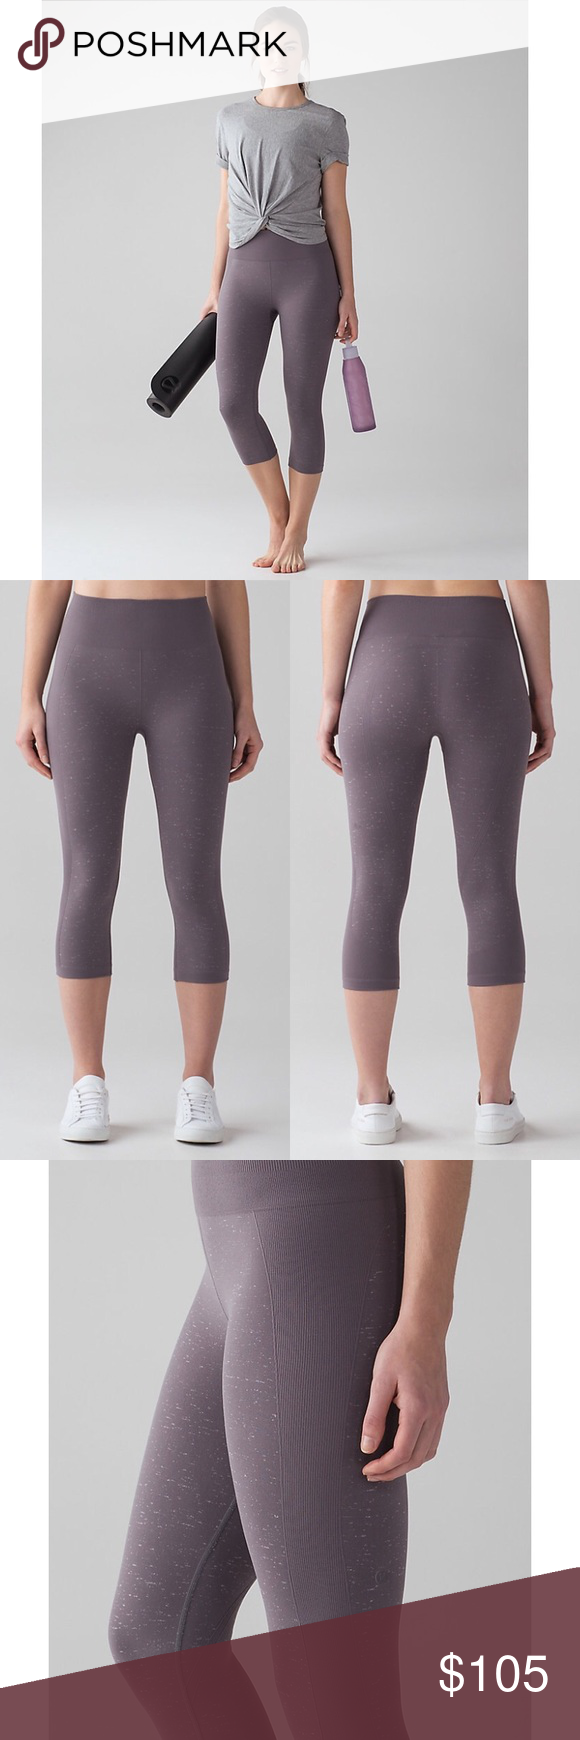 Lululemon Size Guide Review – Yoiki Guide